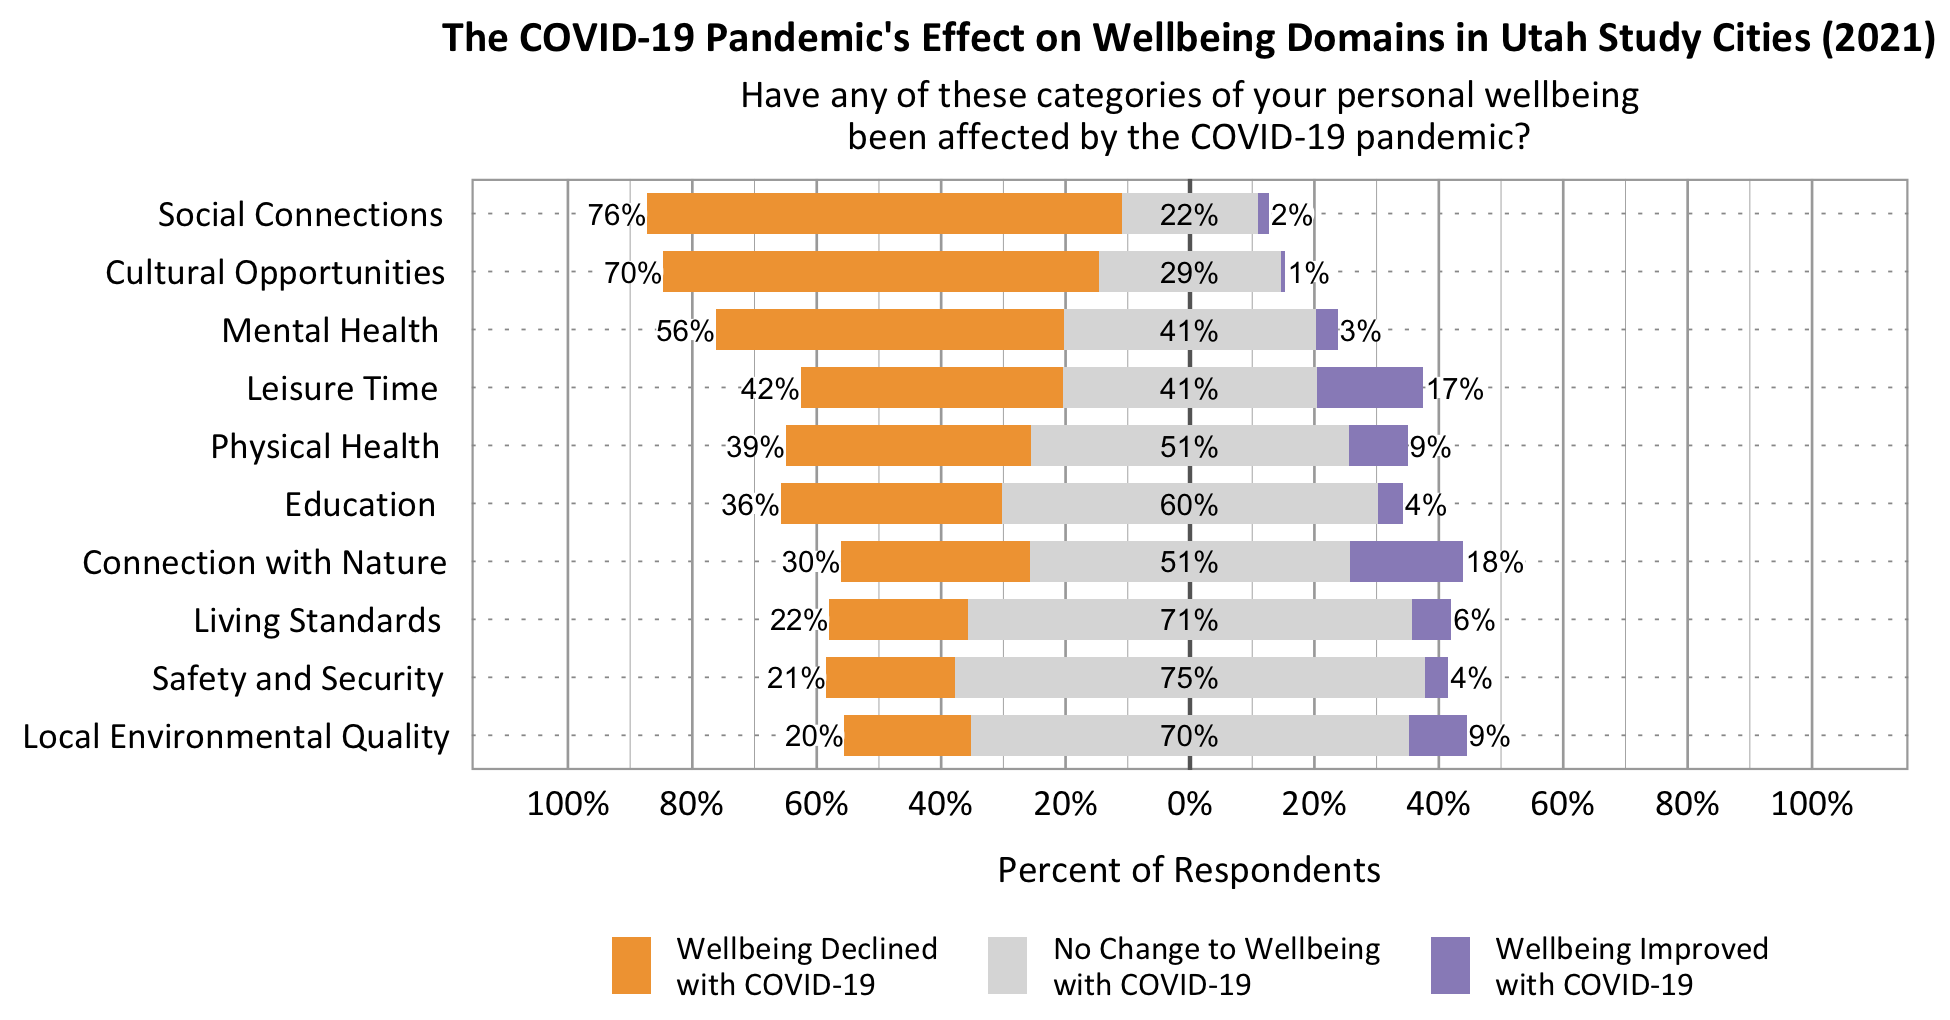 Type: Likert. Title: The COVID-19 Pandemic’s Effect on Wellbeing Domains in Utah Study Cities (2021). Subtitle: Have any of these categories of your personal wellbeing been affected by the COVID-19 pandemic? Data- Category: Social Connections – 76% indicated declined, 22% indicated no change, 2% indicated improved; Cultural Opportunities – 70% indicated declined, 29% indicated no change, 1% indicated improved; Mental Health – 56% indicated declined, 41% indicated no change, 3% indicated improved; Leisure Time – 42% indicated declined, 41% indicated no change, 17% indicated improved; Physical Health – 39% indicated declined, 51% indicated no change, 9% indicated improved; Education – 36% indicated declined, 60% indicated no change, 4% indicated improved; Connection with Nature – 30% indicated declined, 51% indicated no change, 18% indicated improved; Living Standards – 22% indicated declined, 71% indicated no change, 6% indicated improved; Safety and Security – 21% indicated declined, 75% indicated no change, 4% indicated improved; Local Environmental Quality – 20% indicated declined, 70% indicated no change, 9% indicated improved;